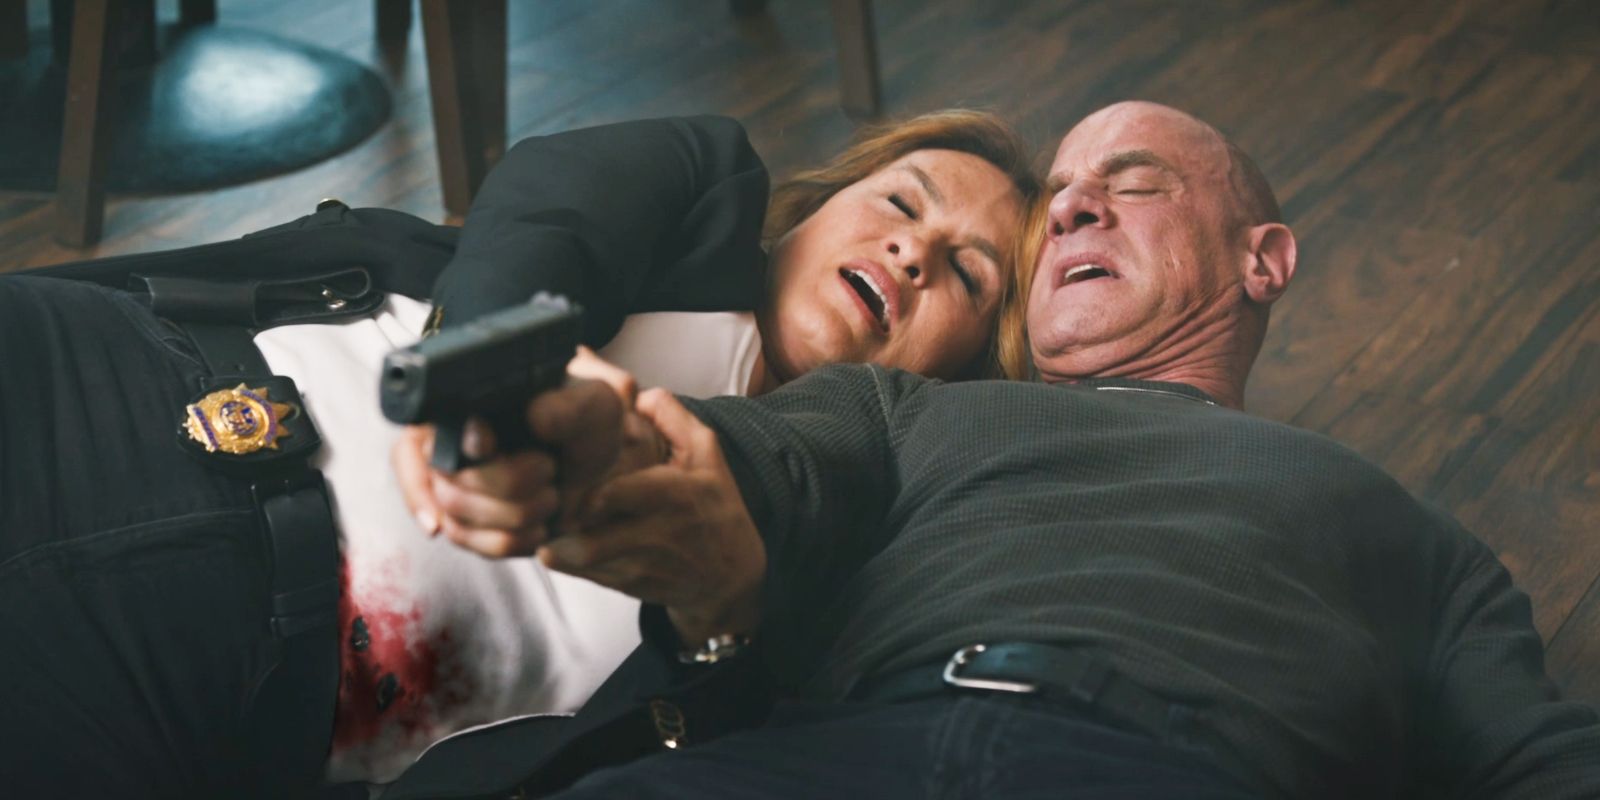 Benson and Stabler aiming gun in Law & Order: Organized Crime